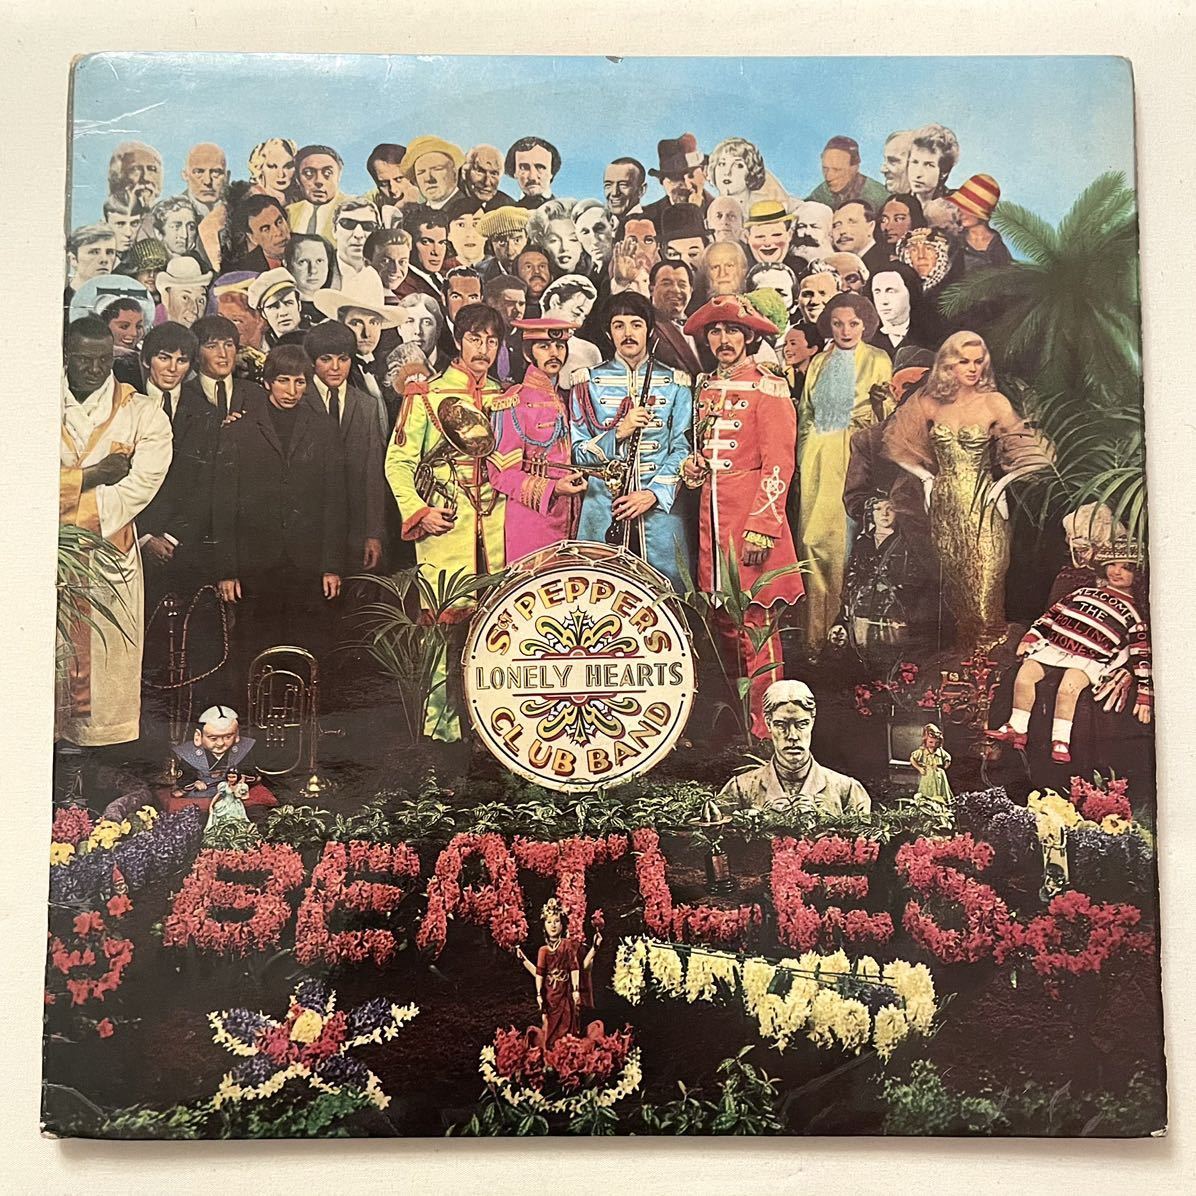 1stプレス完品 特集記事付 UKorg MONO LP THE BEATLES SGT. PEPPERS LONELY HEARTS CLUB BAND UKオリジナル盤 PMC7027 ビートルズ レコード_画像1